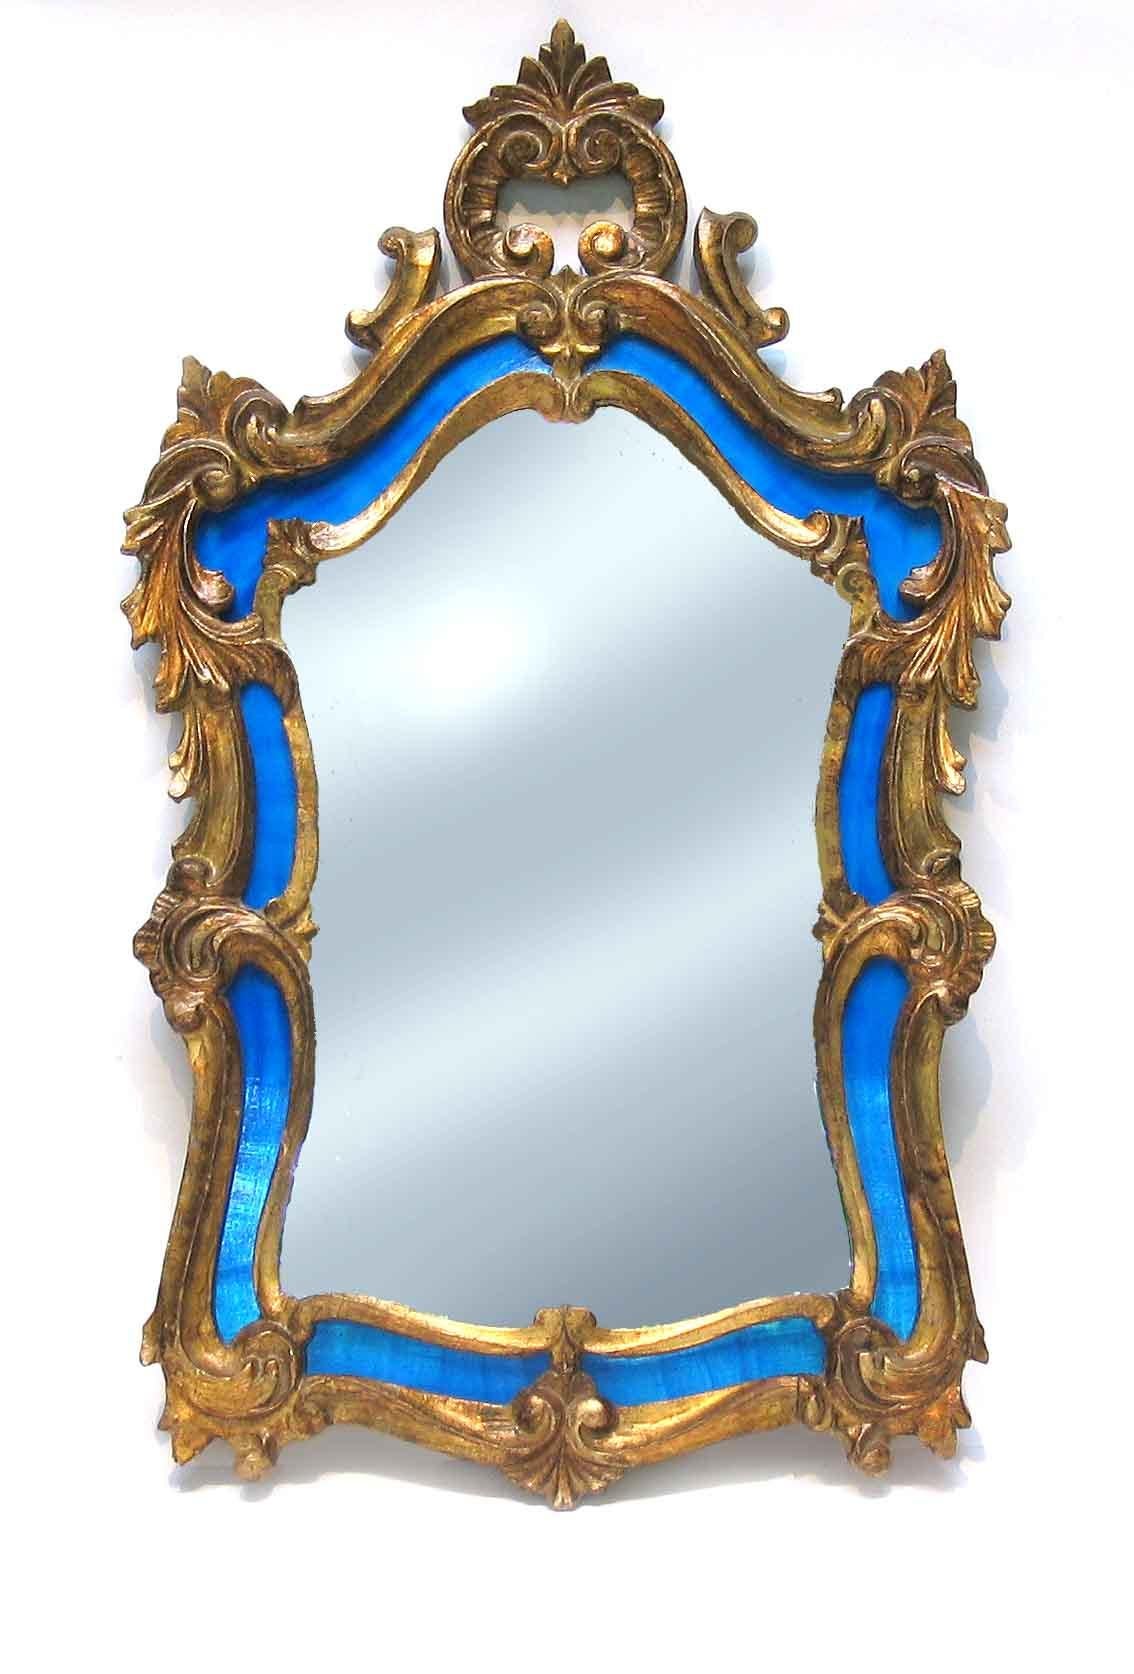 An Italian Carved Giltwood Mirror in the Baroque Style 20th Century For Sale 4